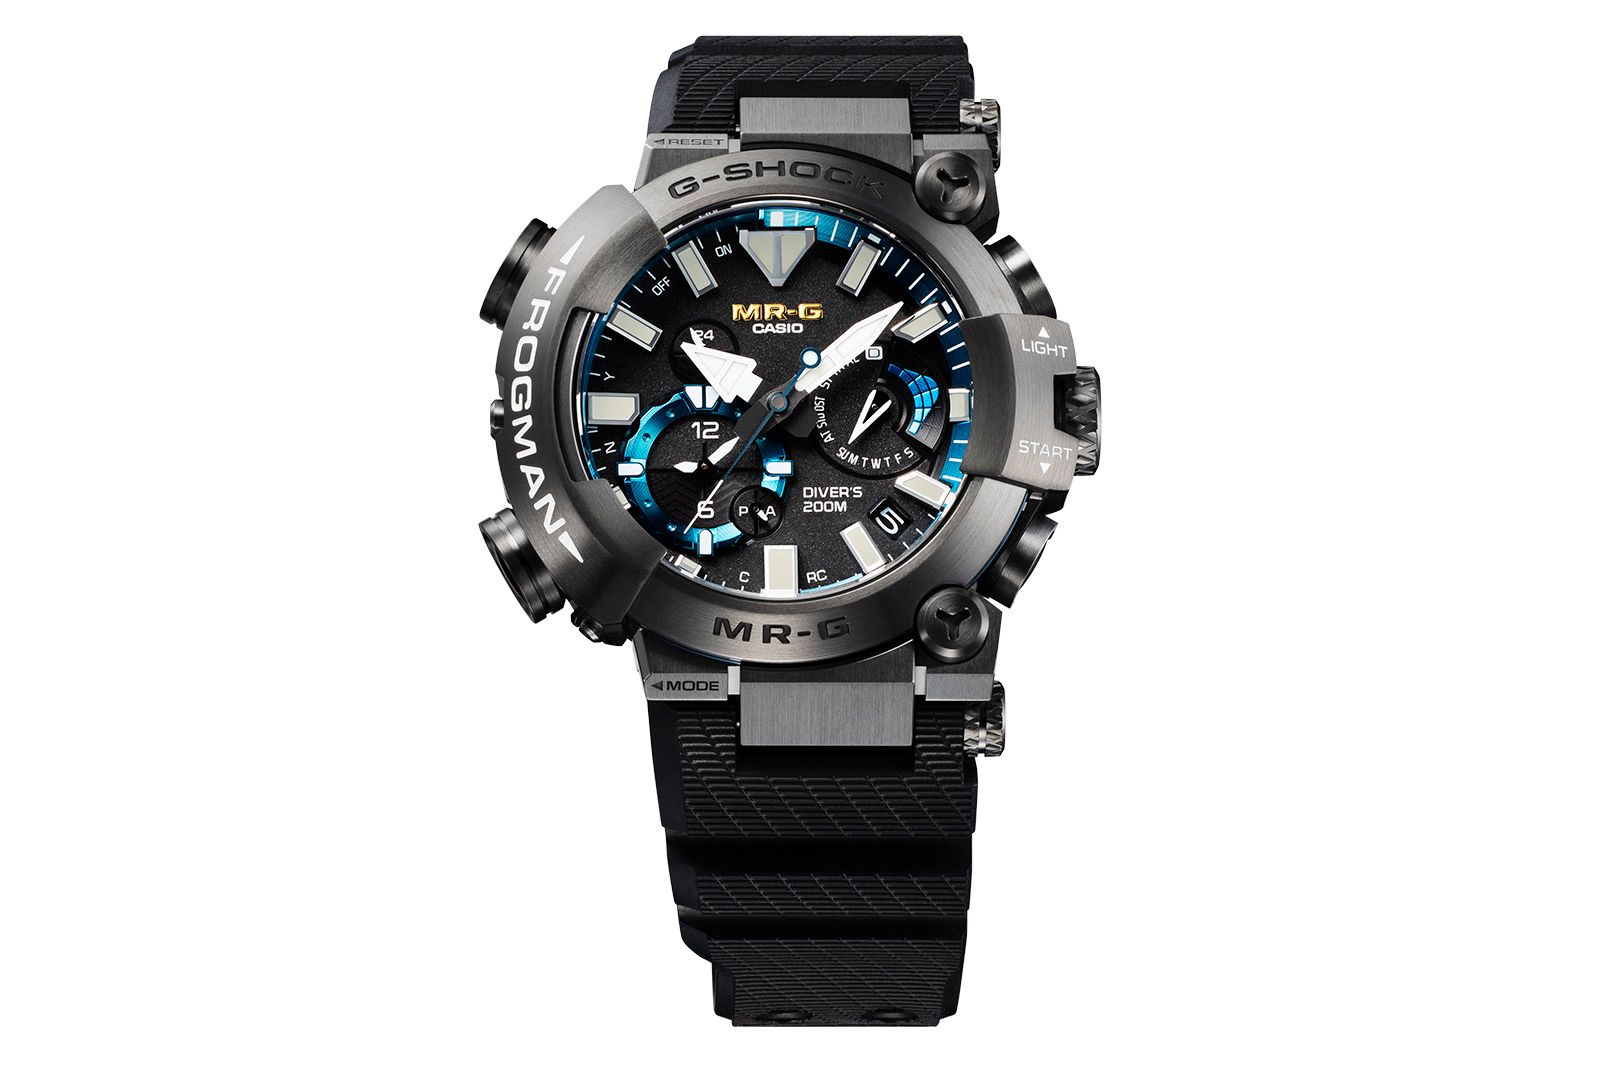 Review: Diving With The Casio G-Shock Frogman MRG-BF1000R